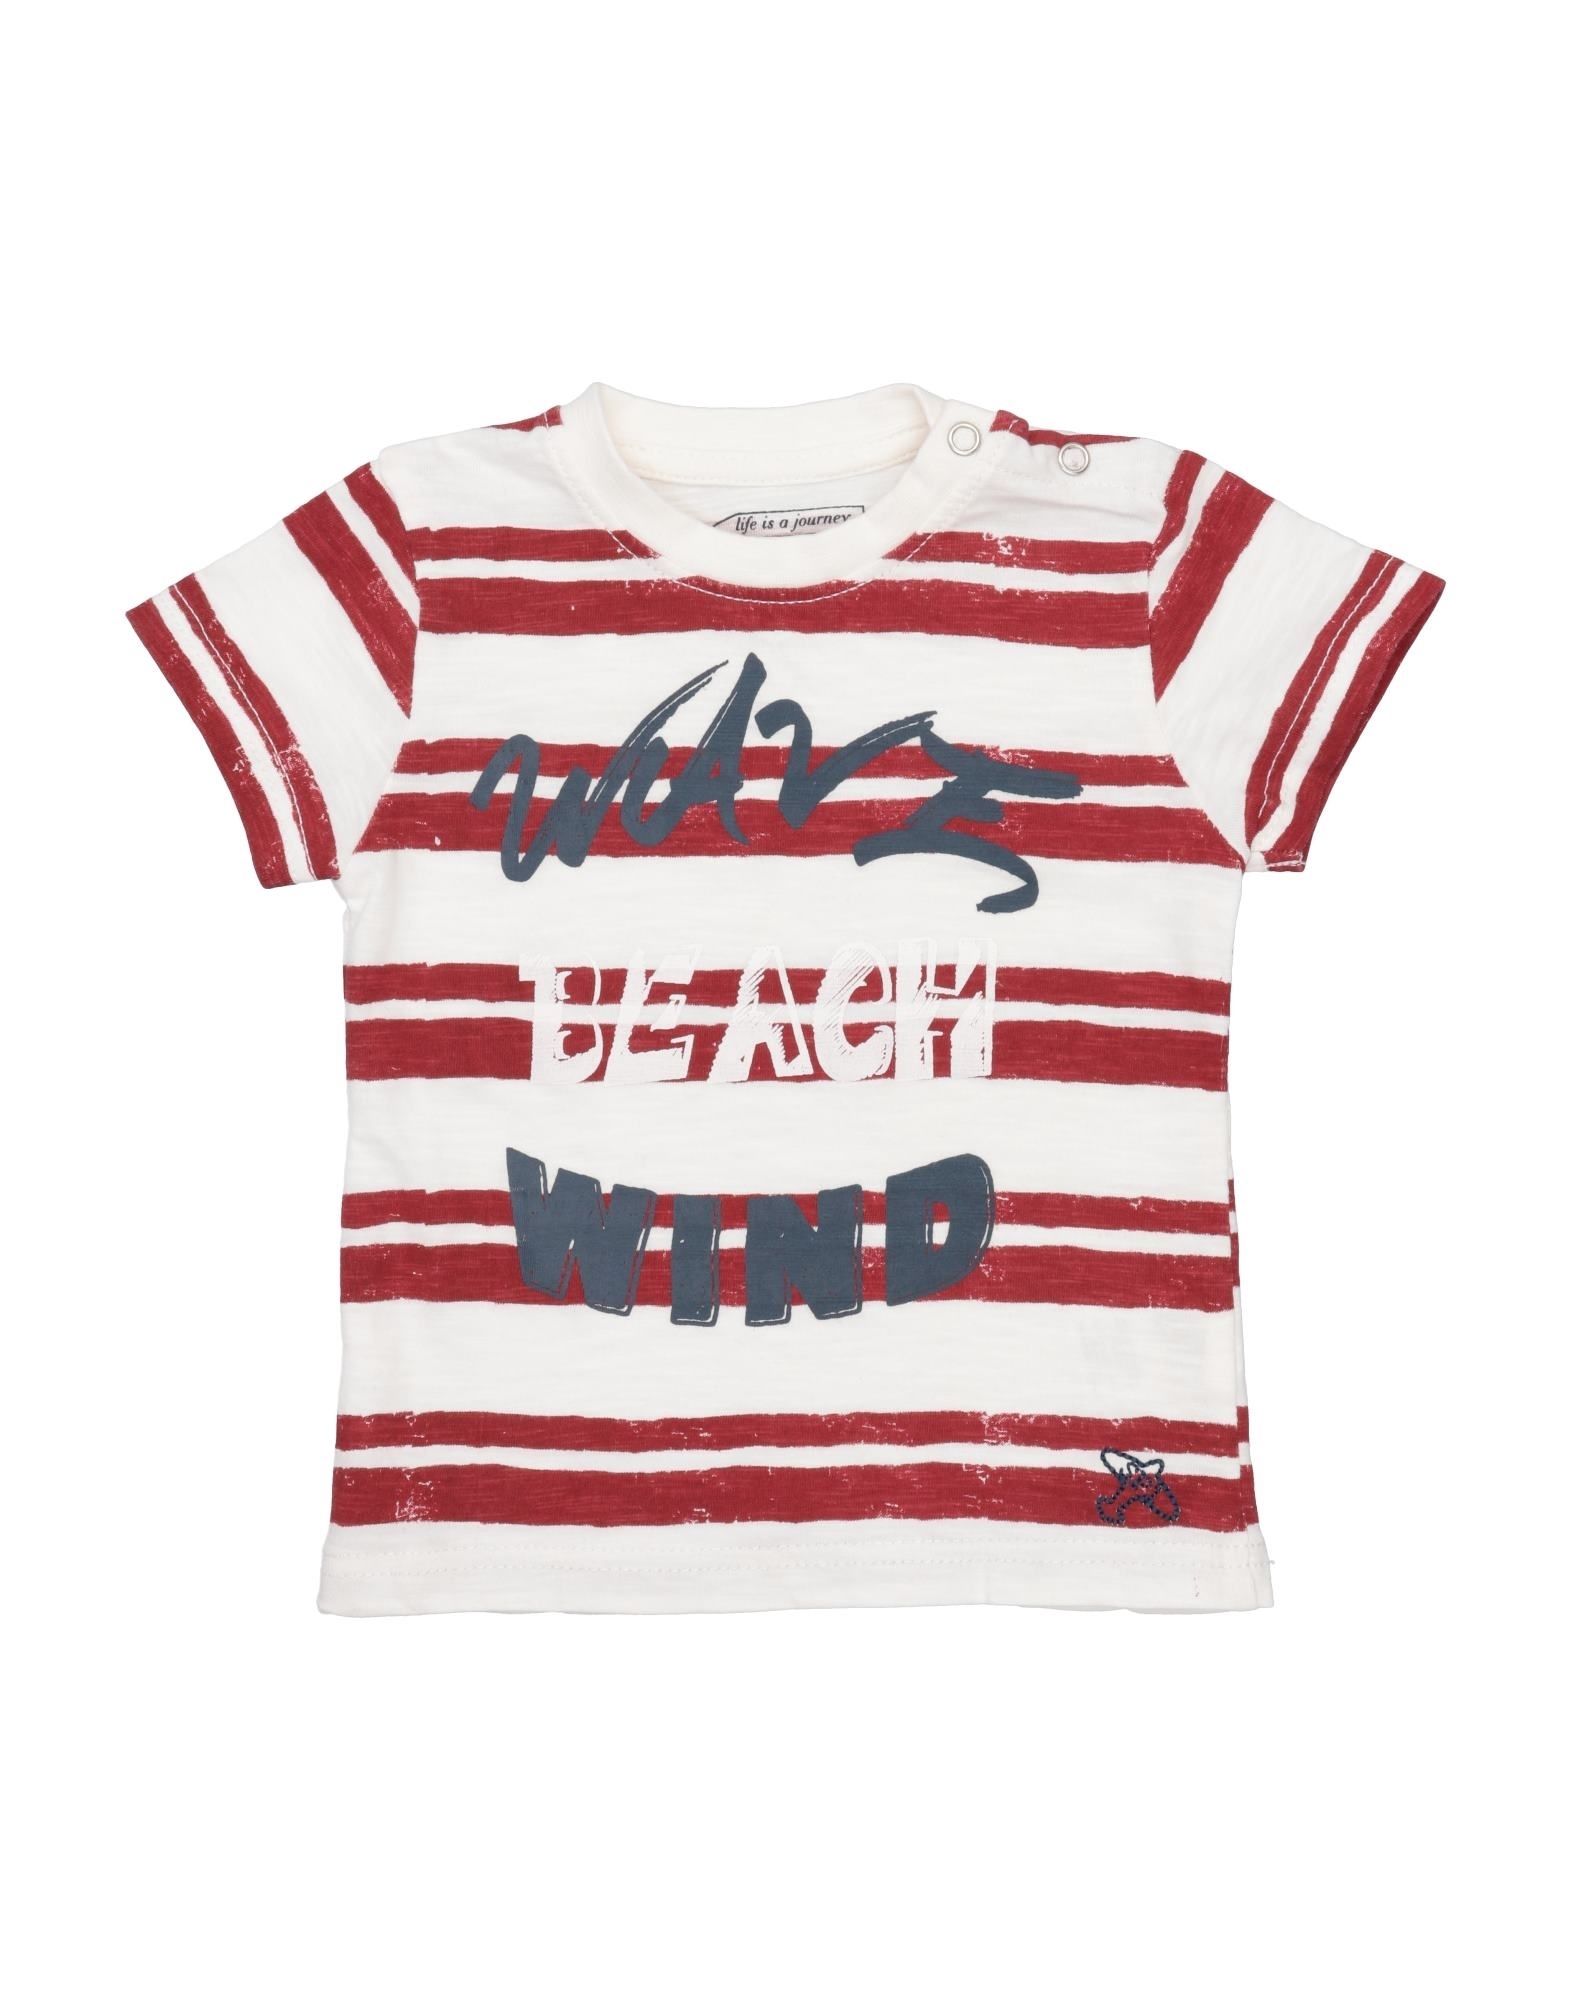 Sp1 Kids' T-shirts In Maroon